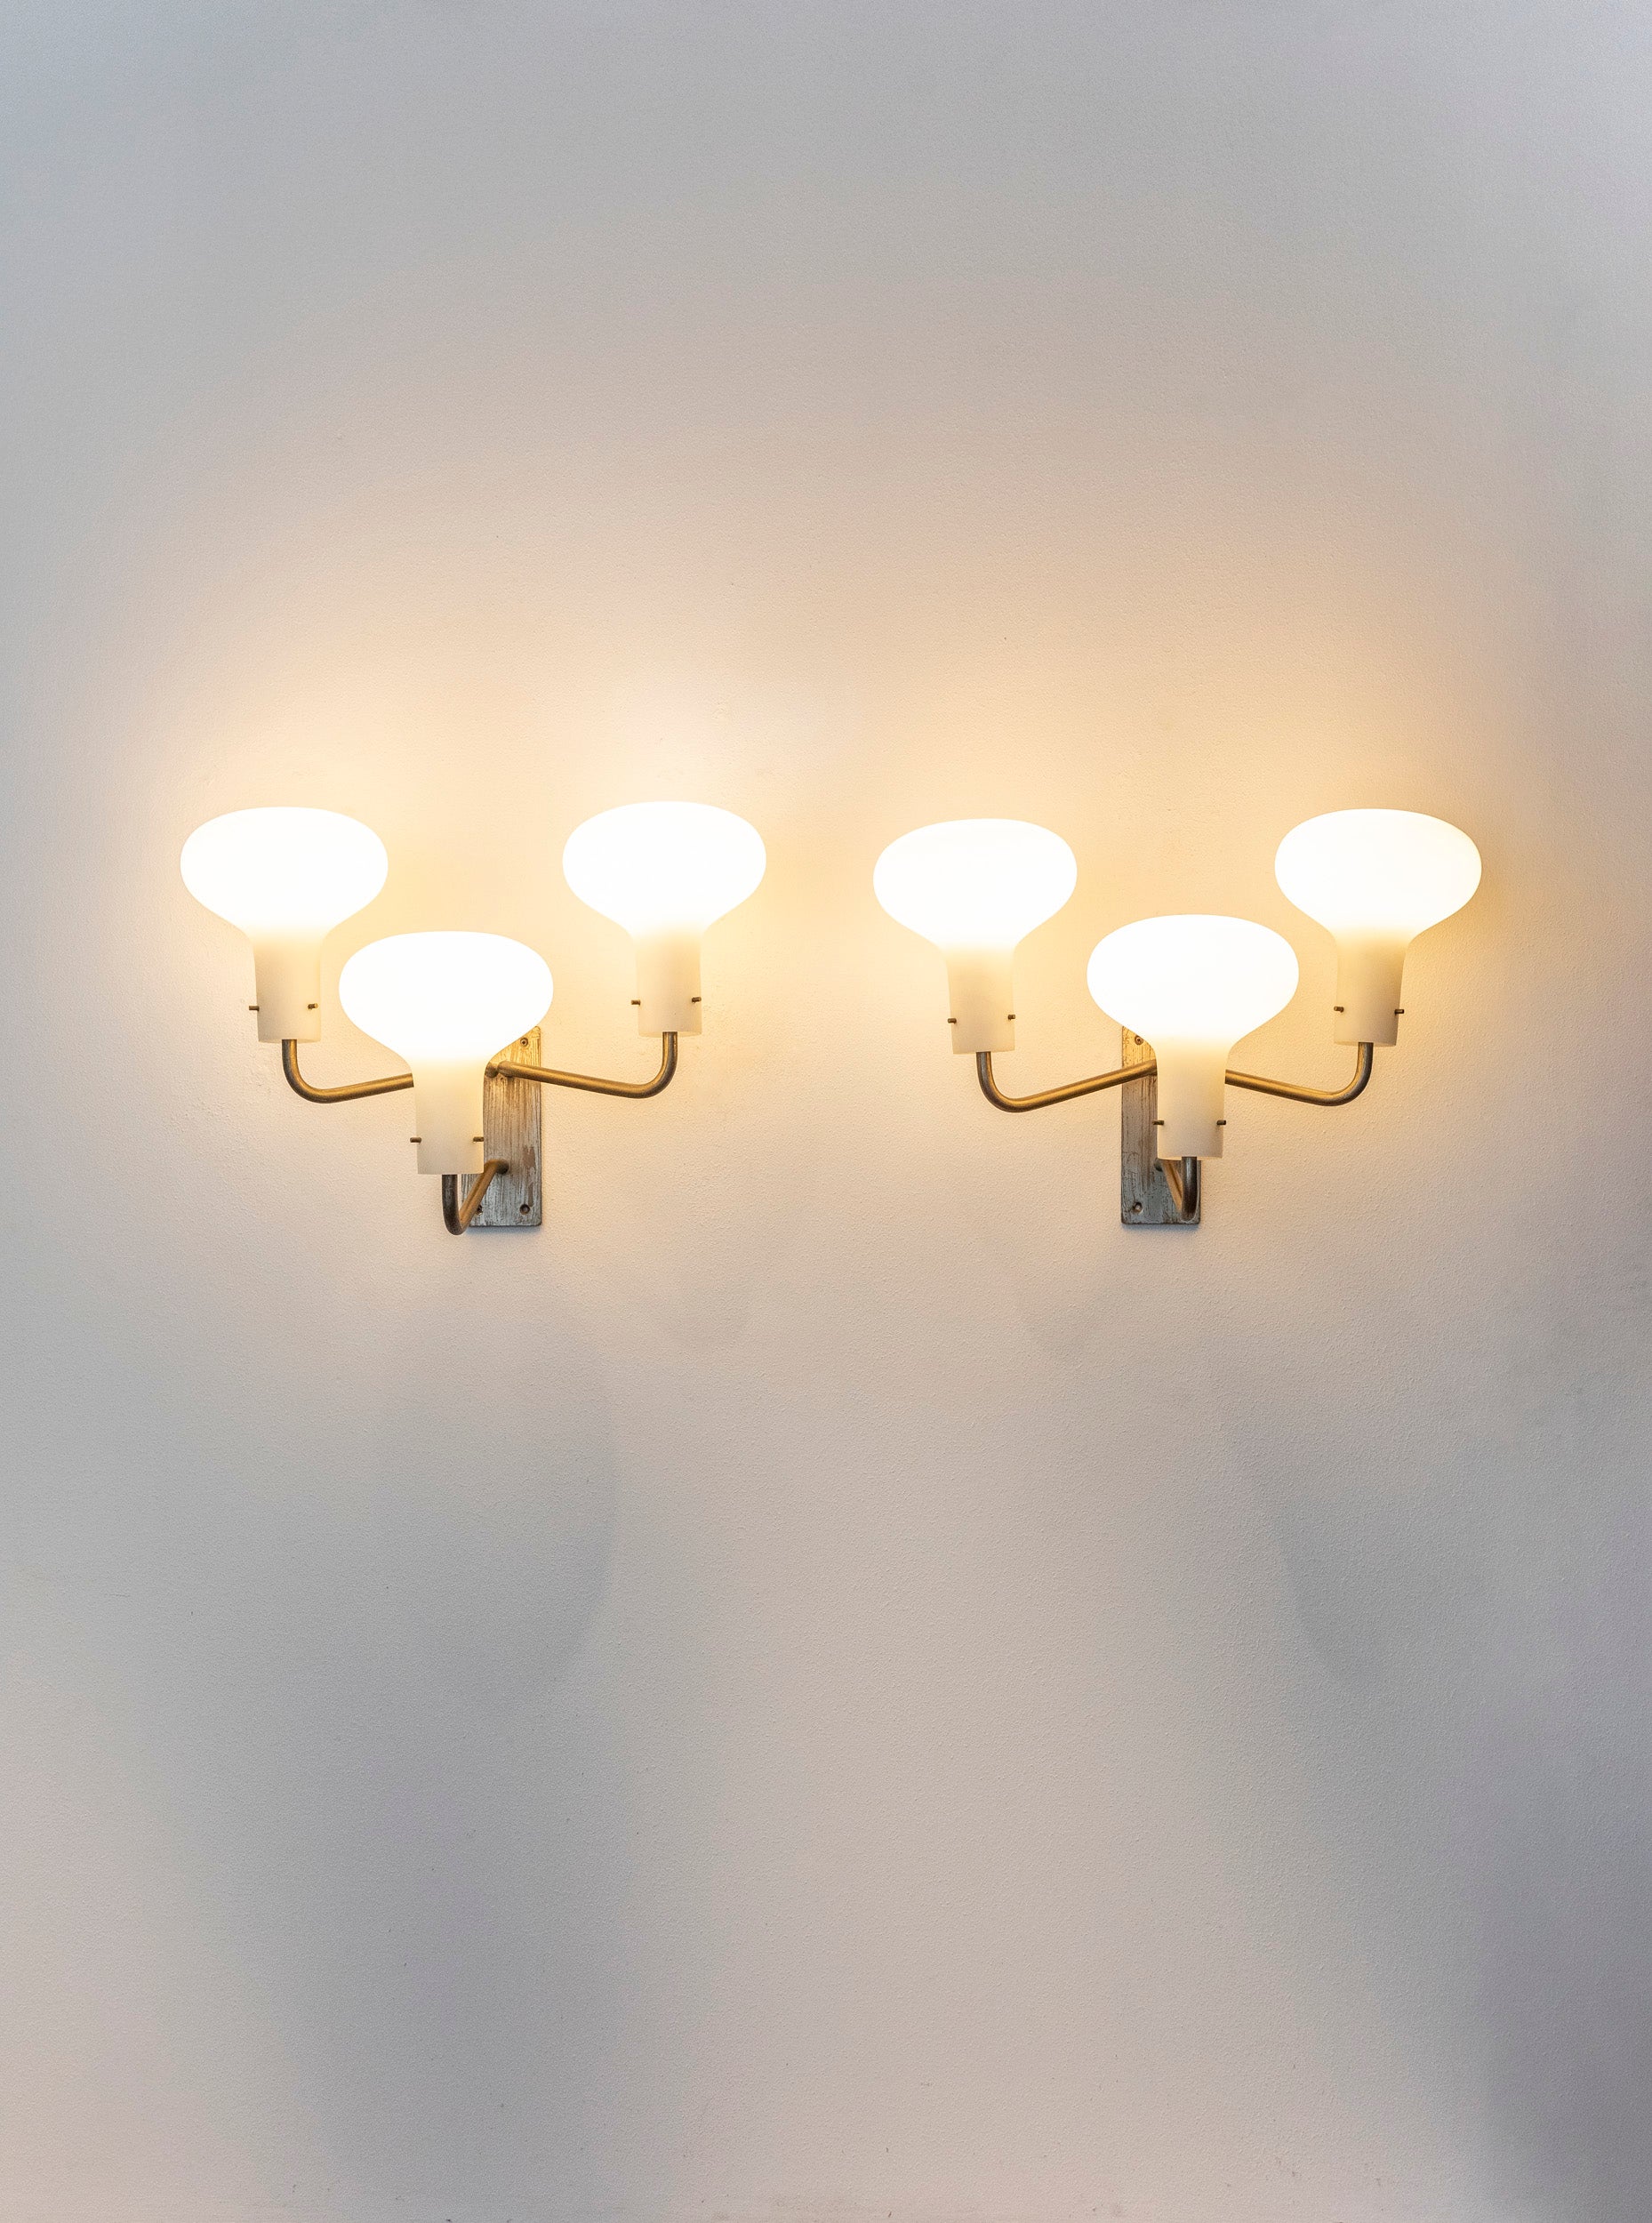 Ignazio Gardella for Azucena pair of wall lights or sconces model LP12 each with three opaque or frosted glass shades suspended from elegant patinated bronze finish brass arms and original backplates, Italy 1959.
Signed Azucena.

The wall lights